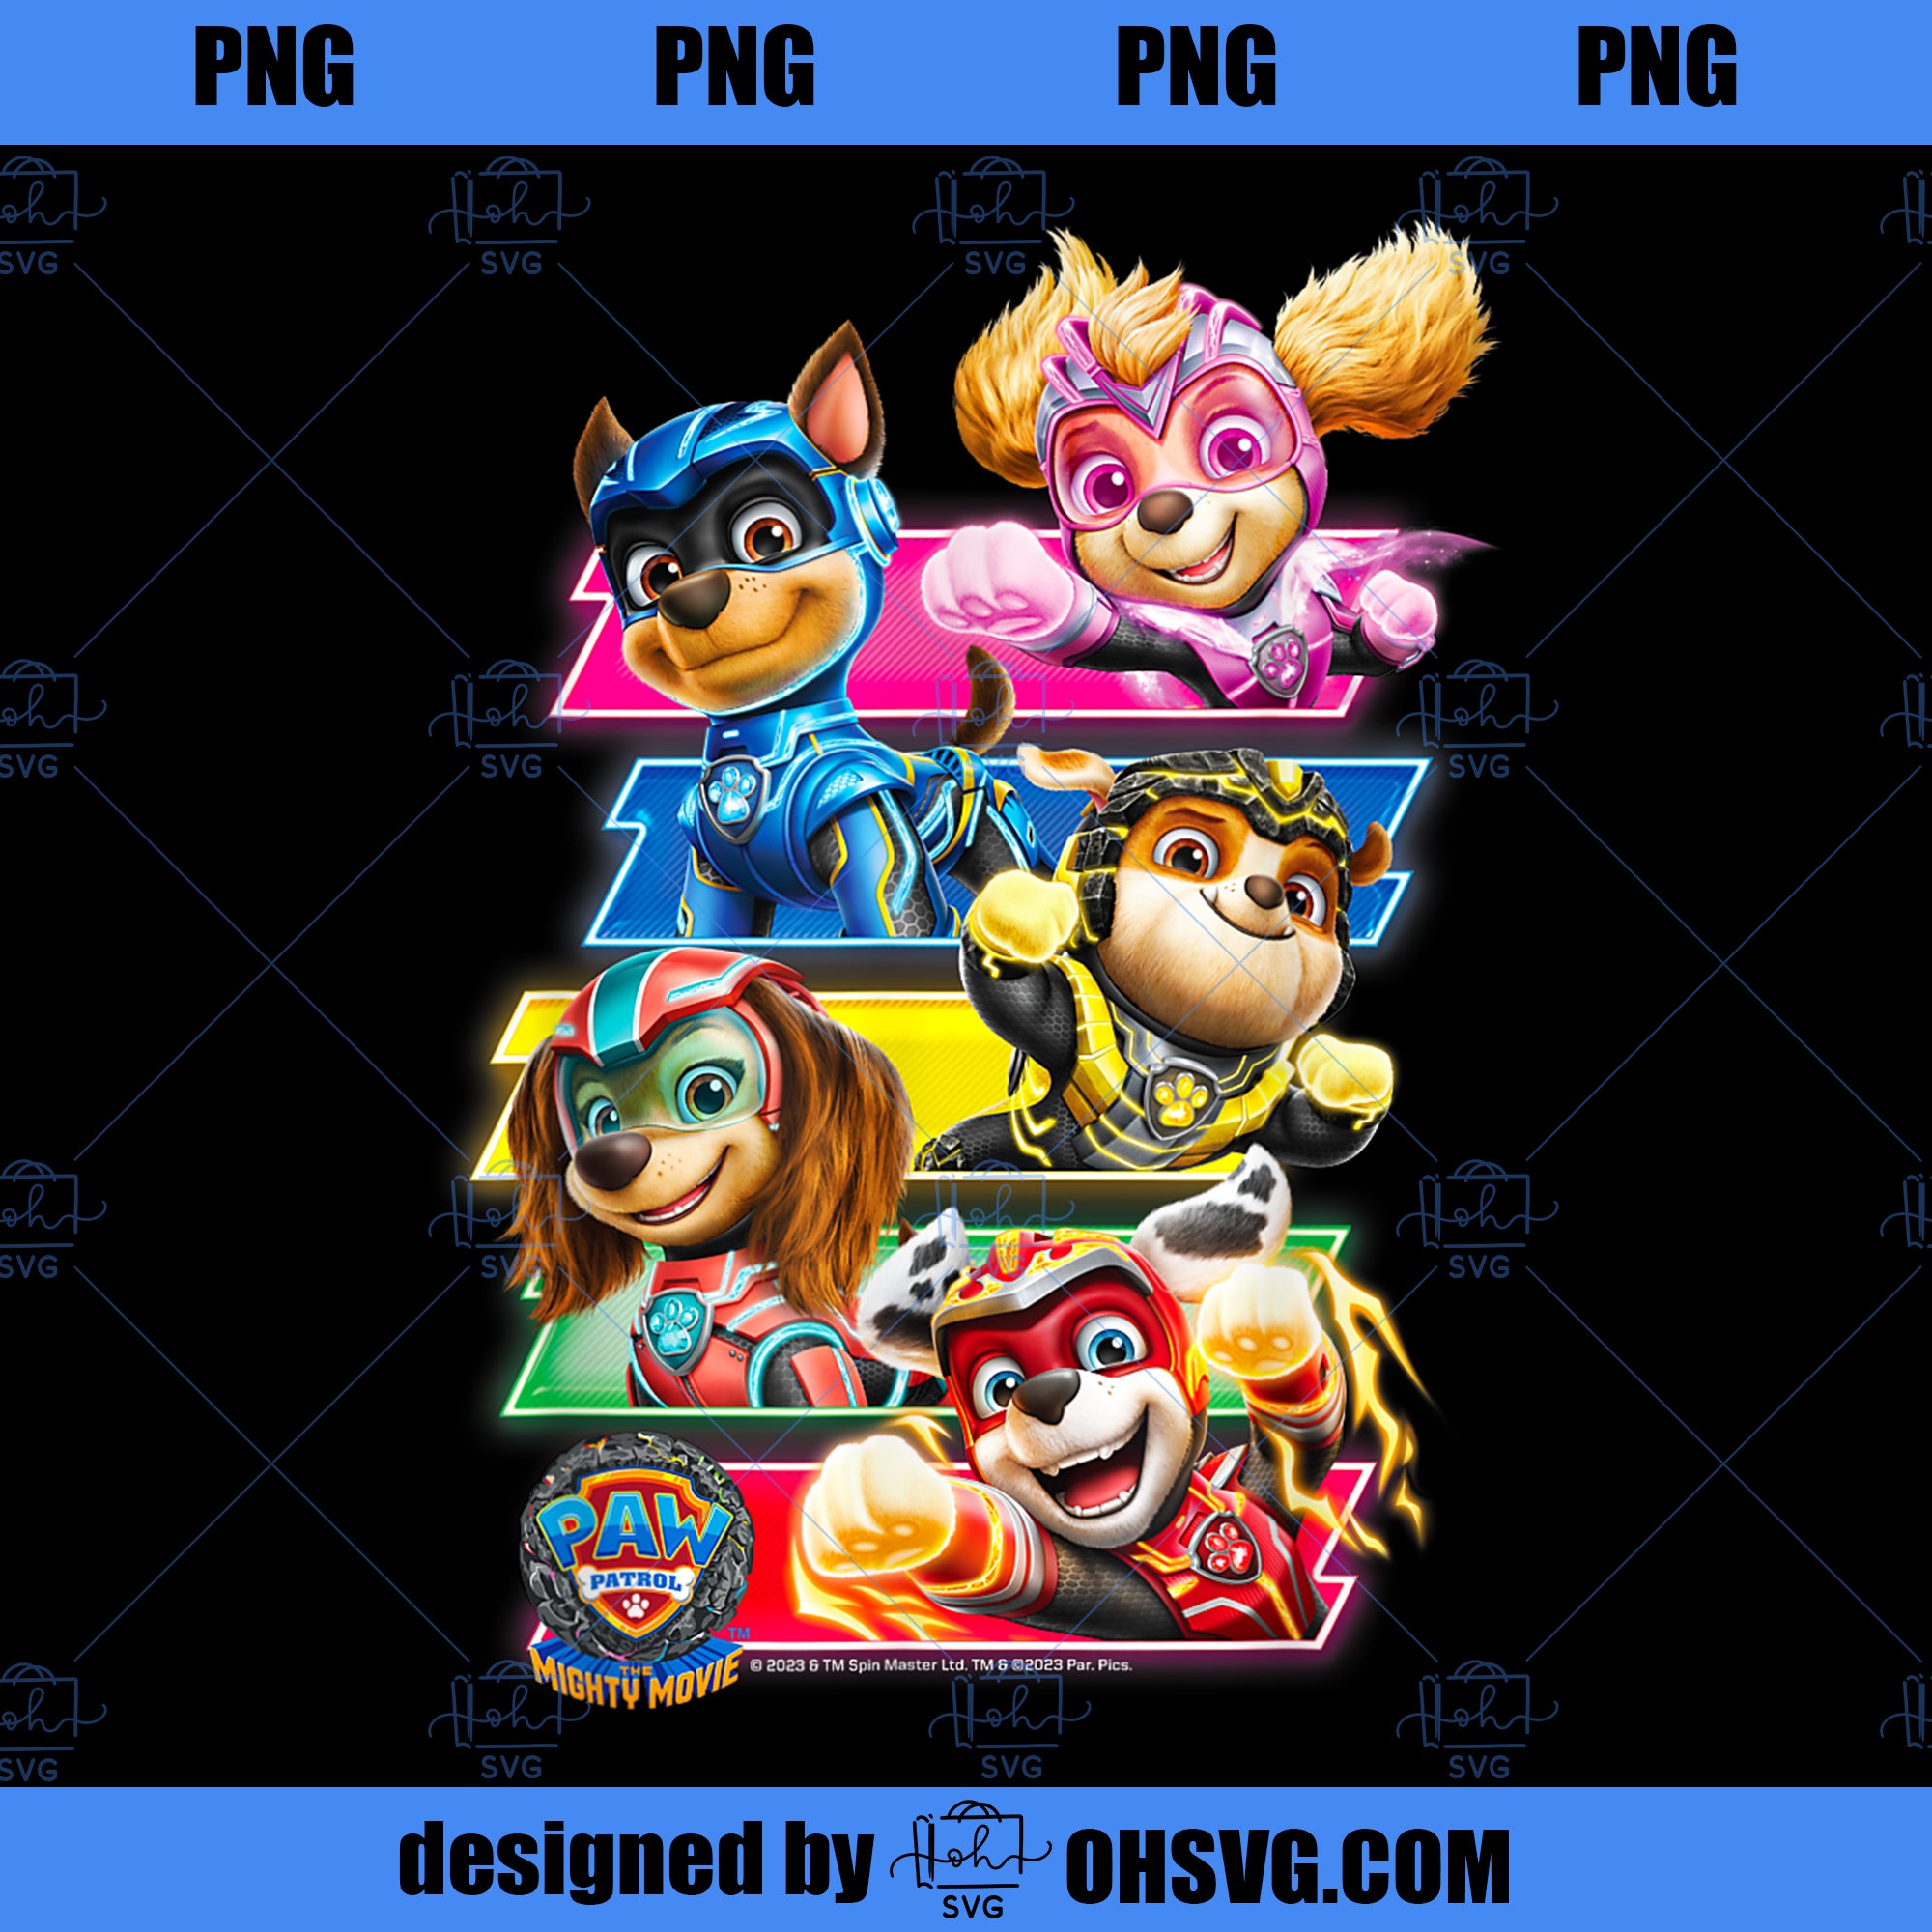 PAW Patrol The Mighty Movie Comic Strip Group PNG, Movies PNG, PAW Patrol PNG